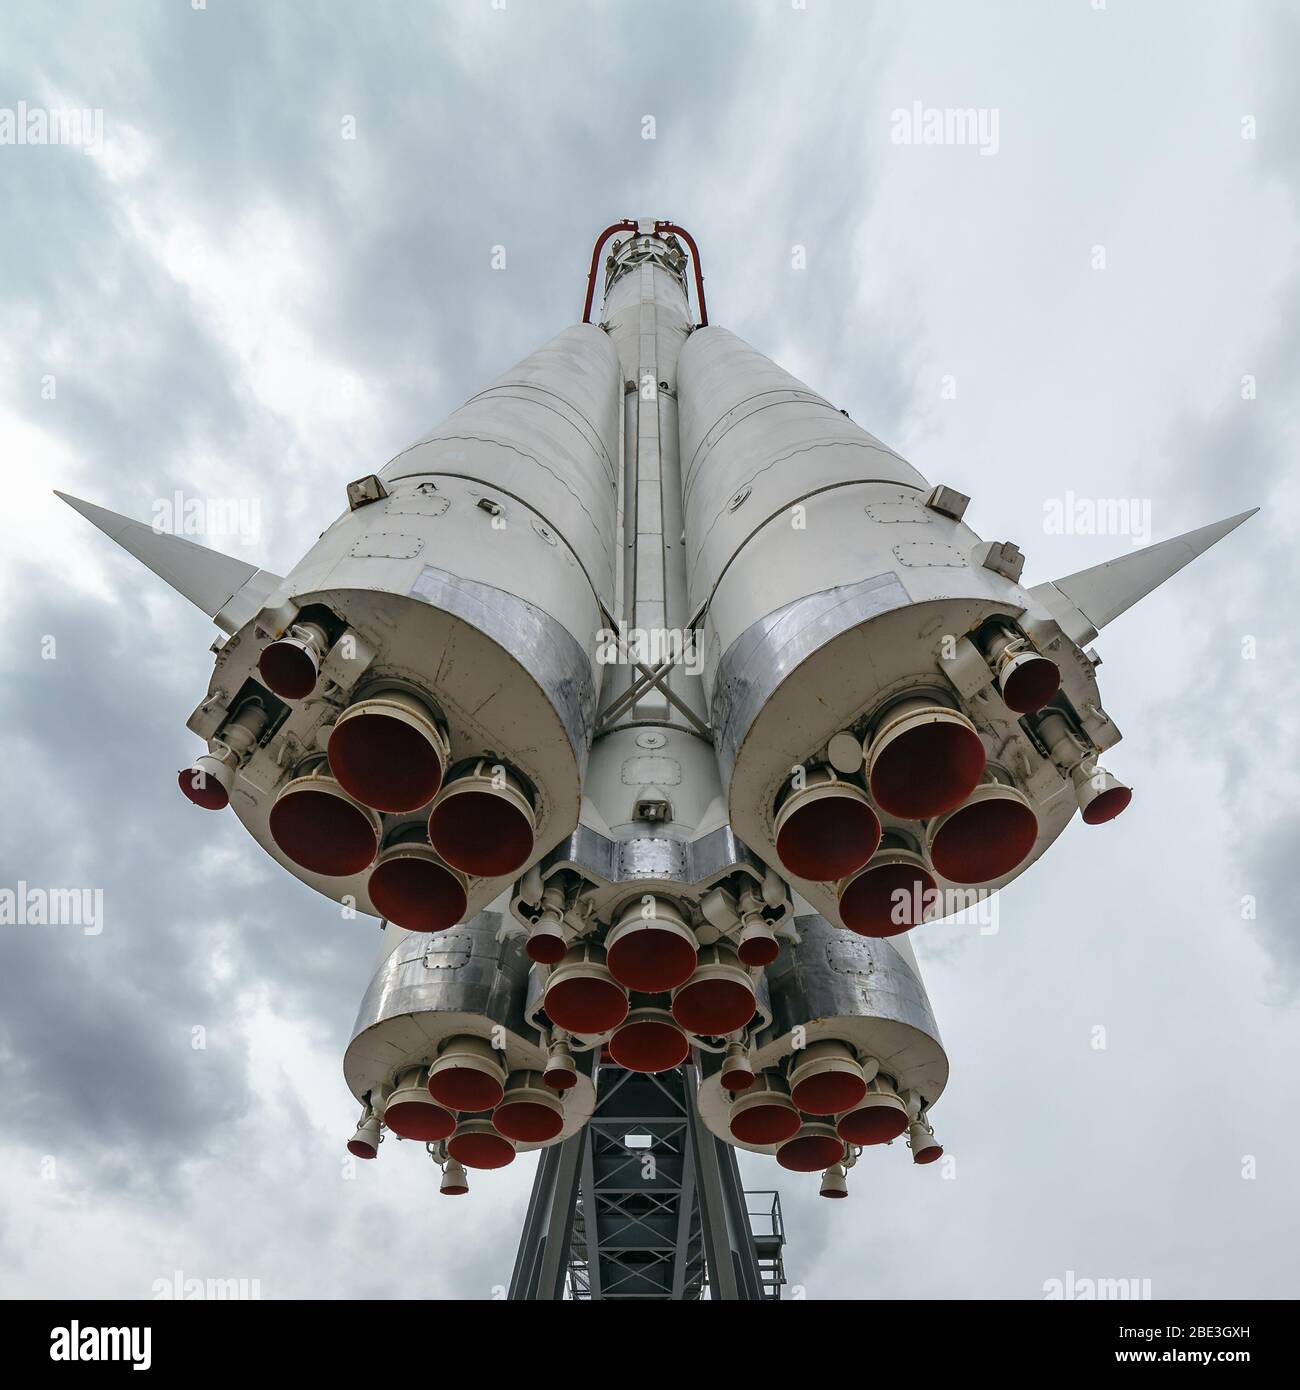 Moscow. VDNH. Spaceship Vostok at exhibition. The view from jet nozzles side - Russia, Moscow, April, 23, 2015 Stock Photo